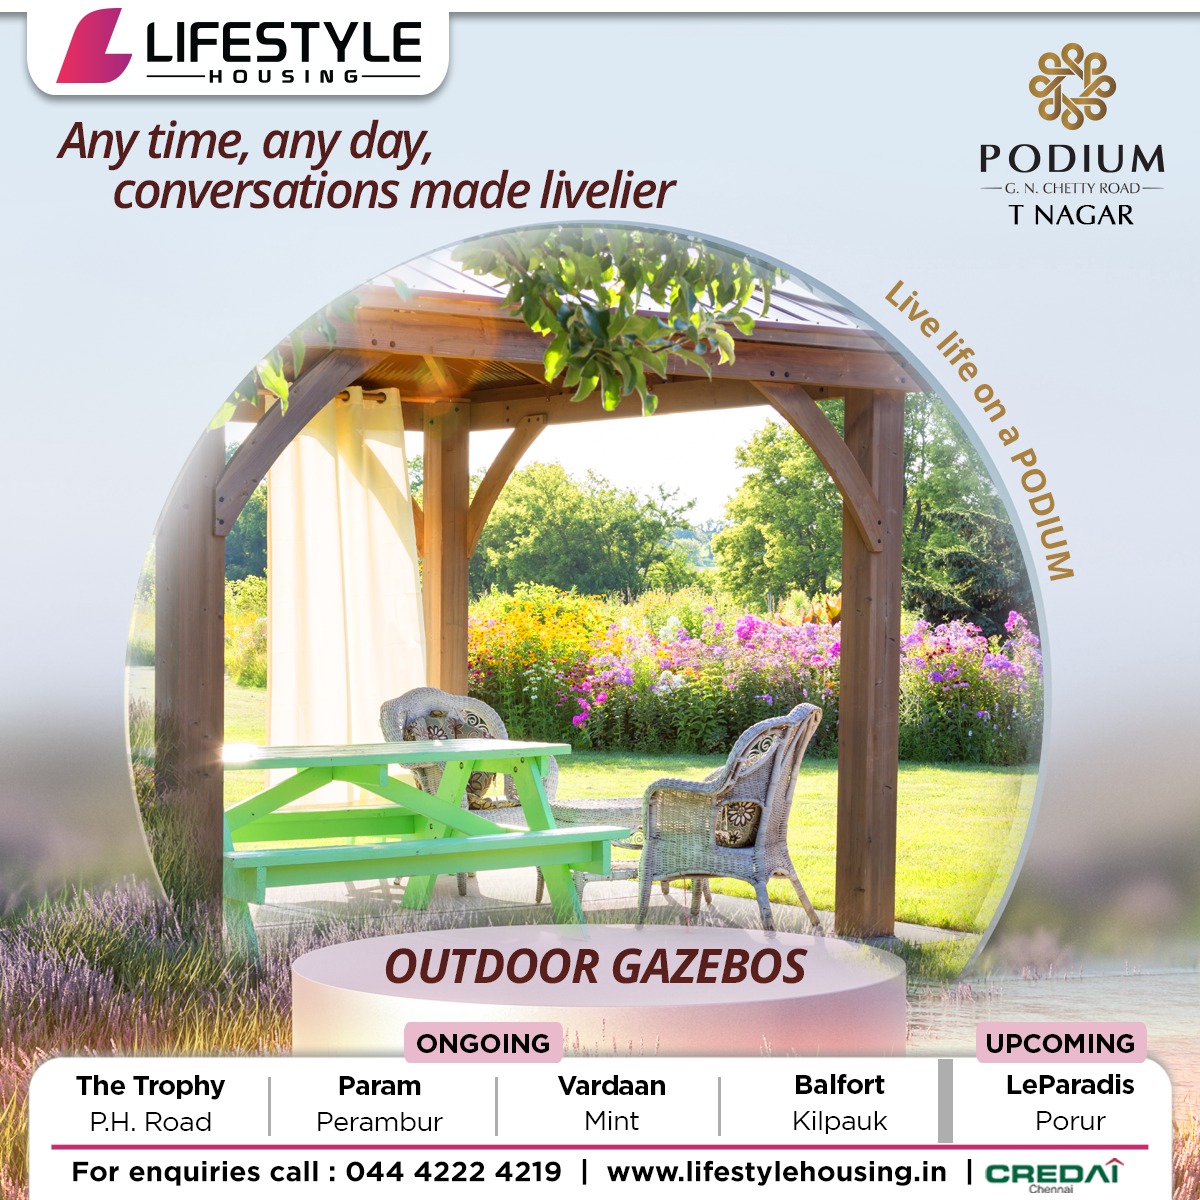 Any time, any day,  conversations are made livelier.
Outdoor gazebos encircled by greenery.

#lifestyle #lifestylehousing #realestate #greenry #gazebos #chennaihomes #dreahome #chennaiapartments #freshair